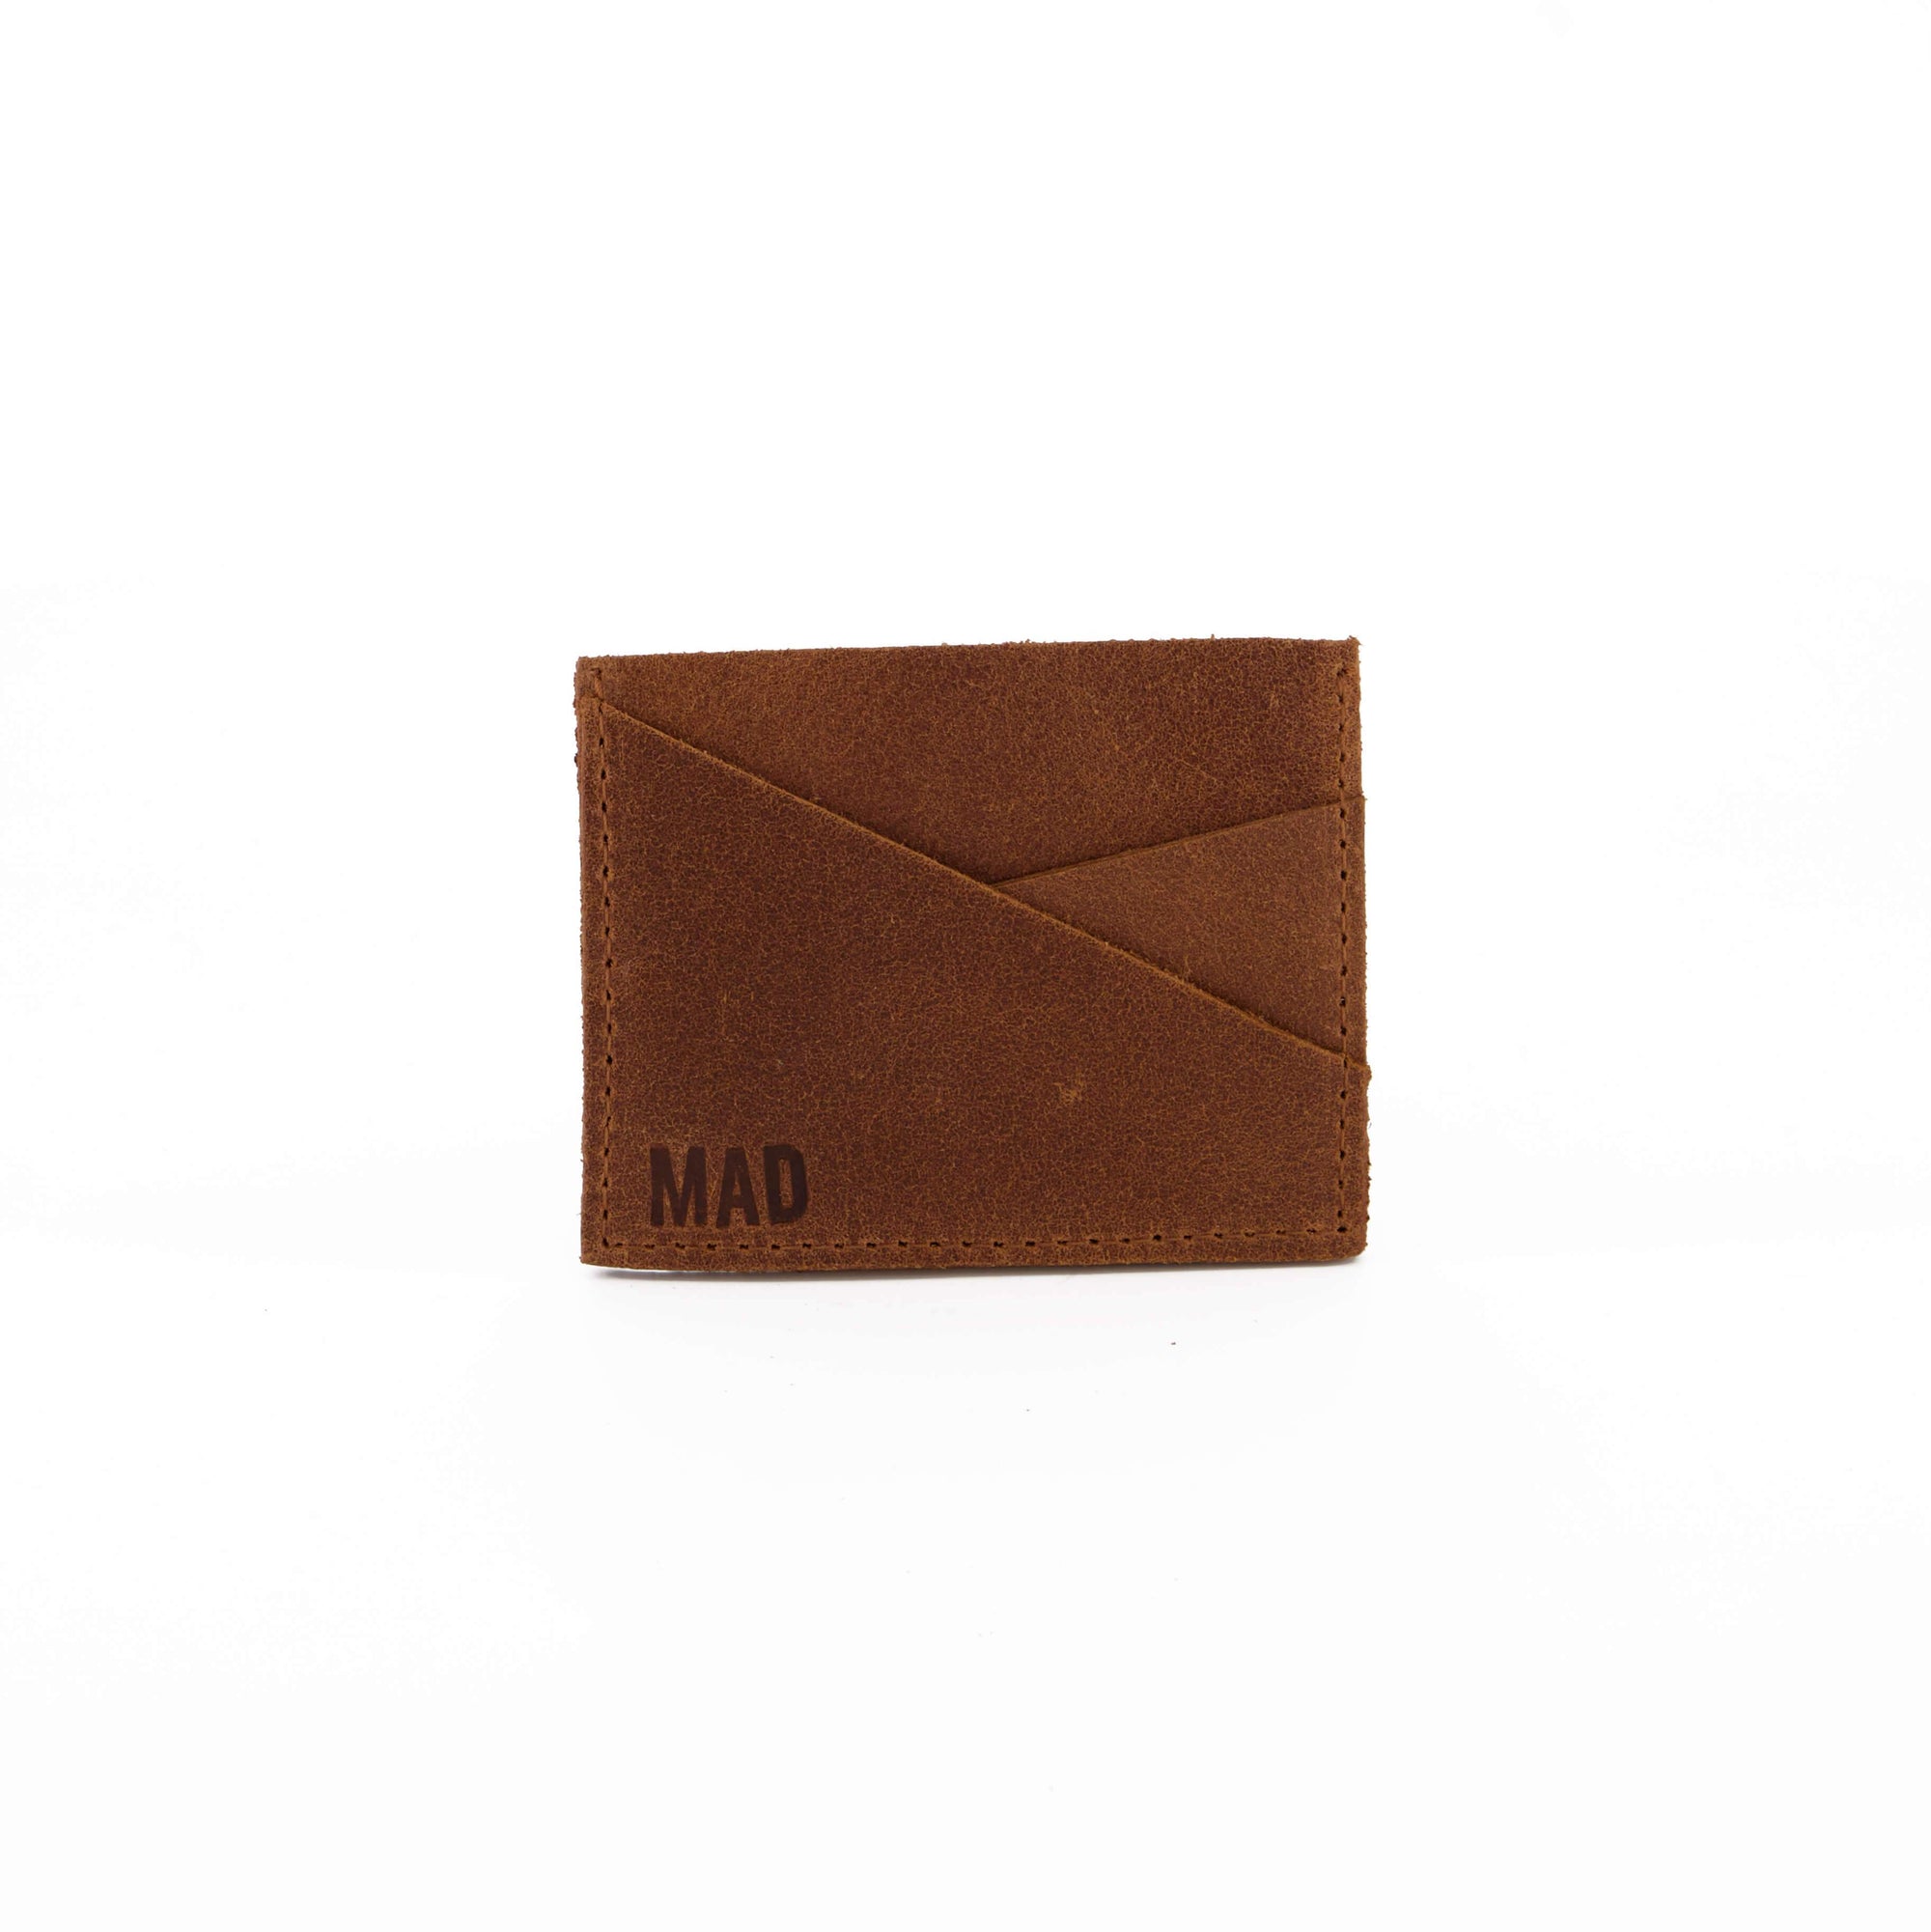 personalized leather wallet, card holder, 